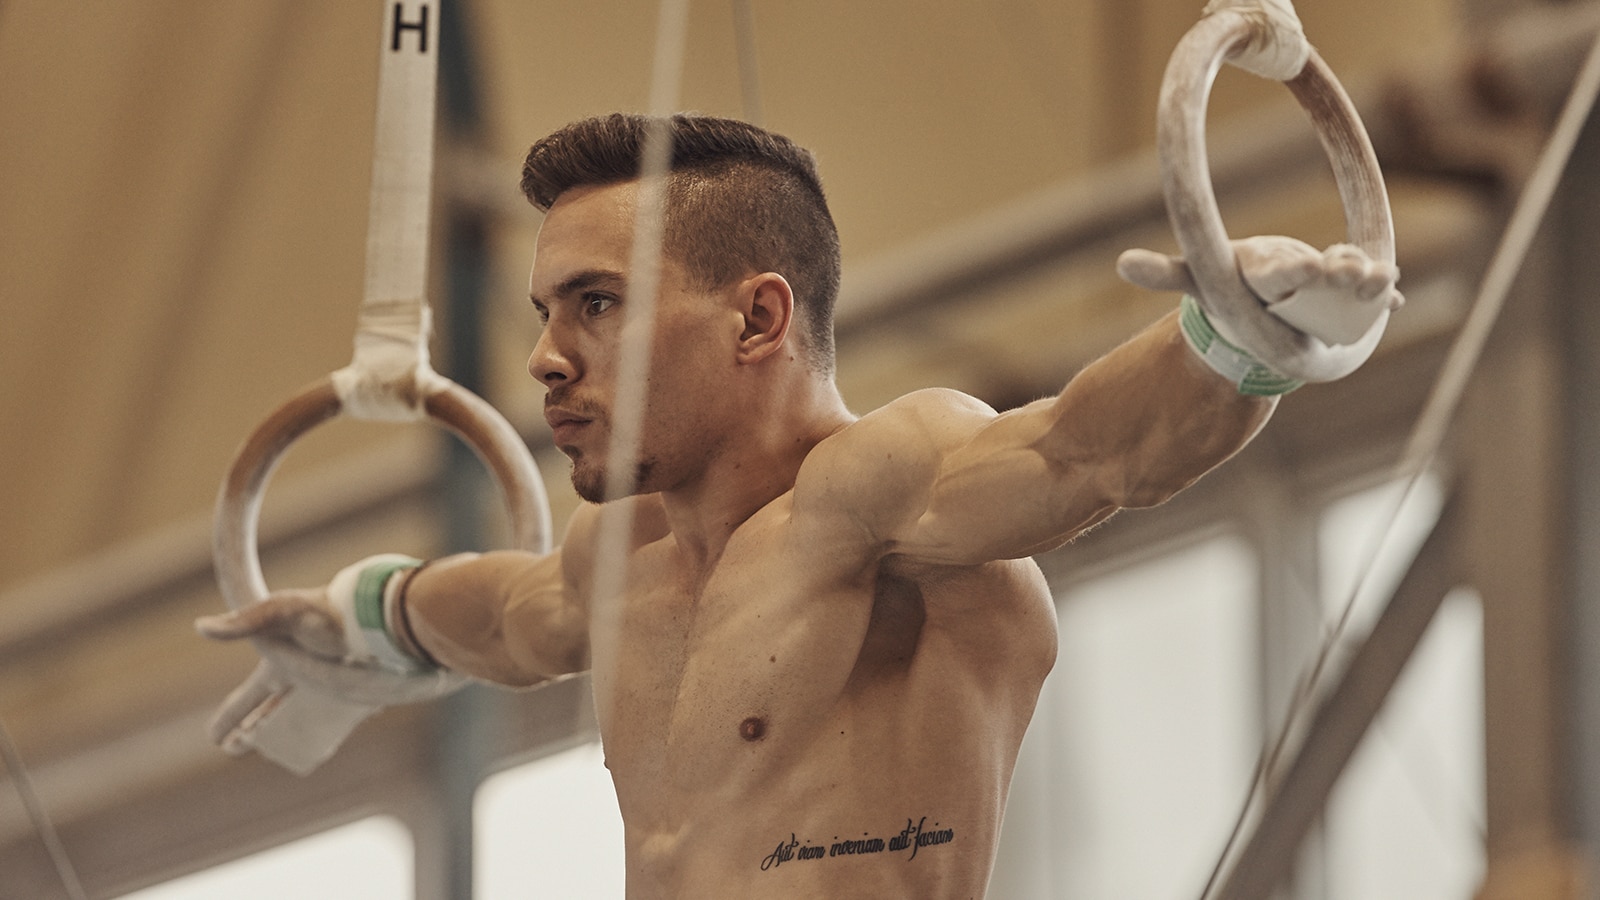 The Olympic Gymnast You Need To Know | The Journal | MR PORTER